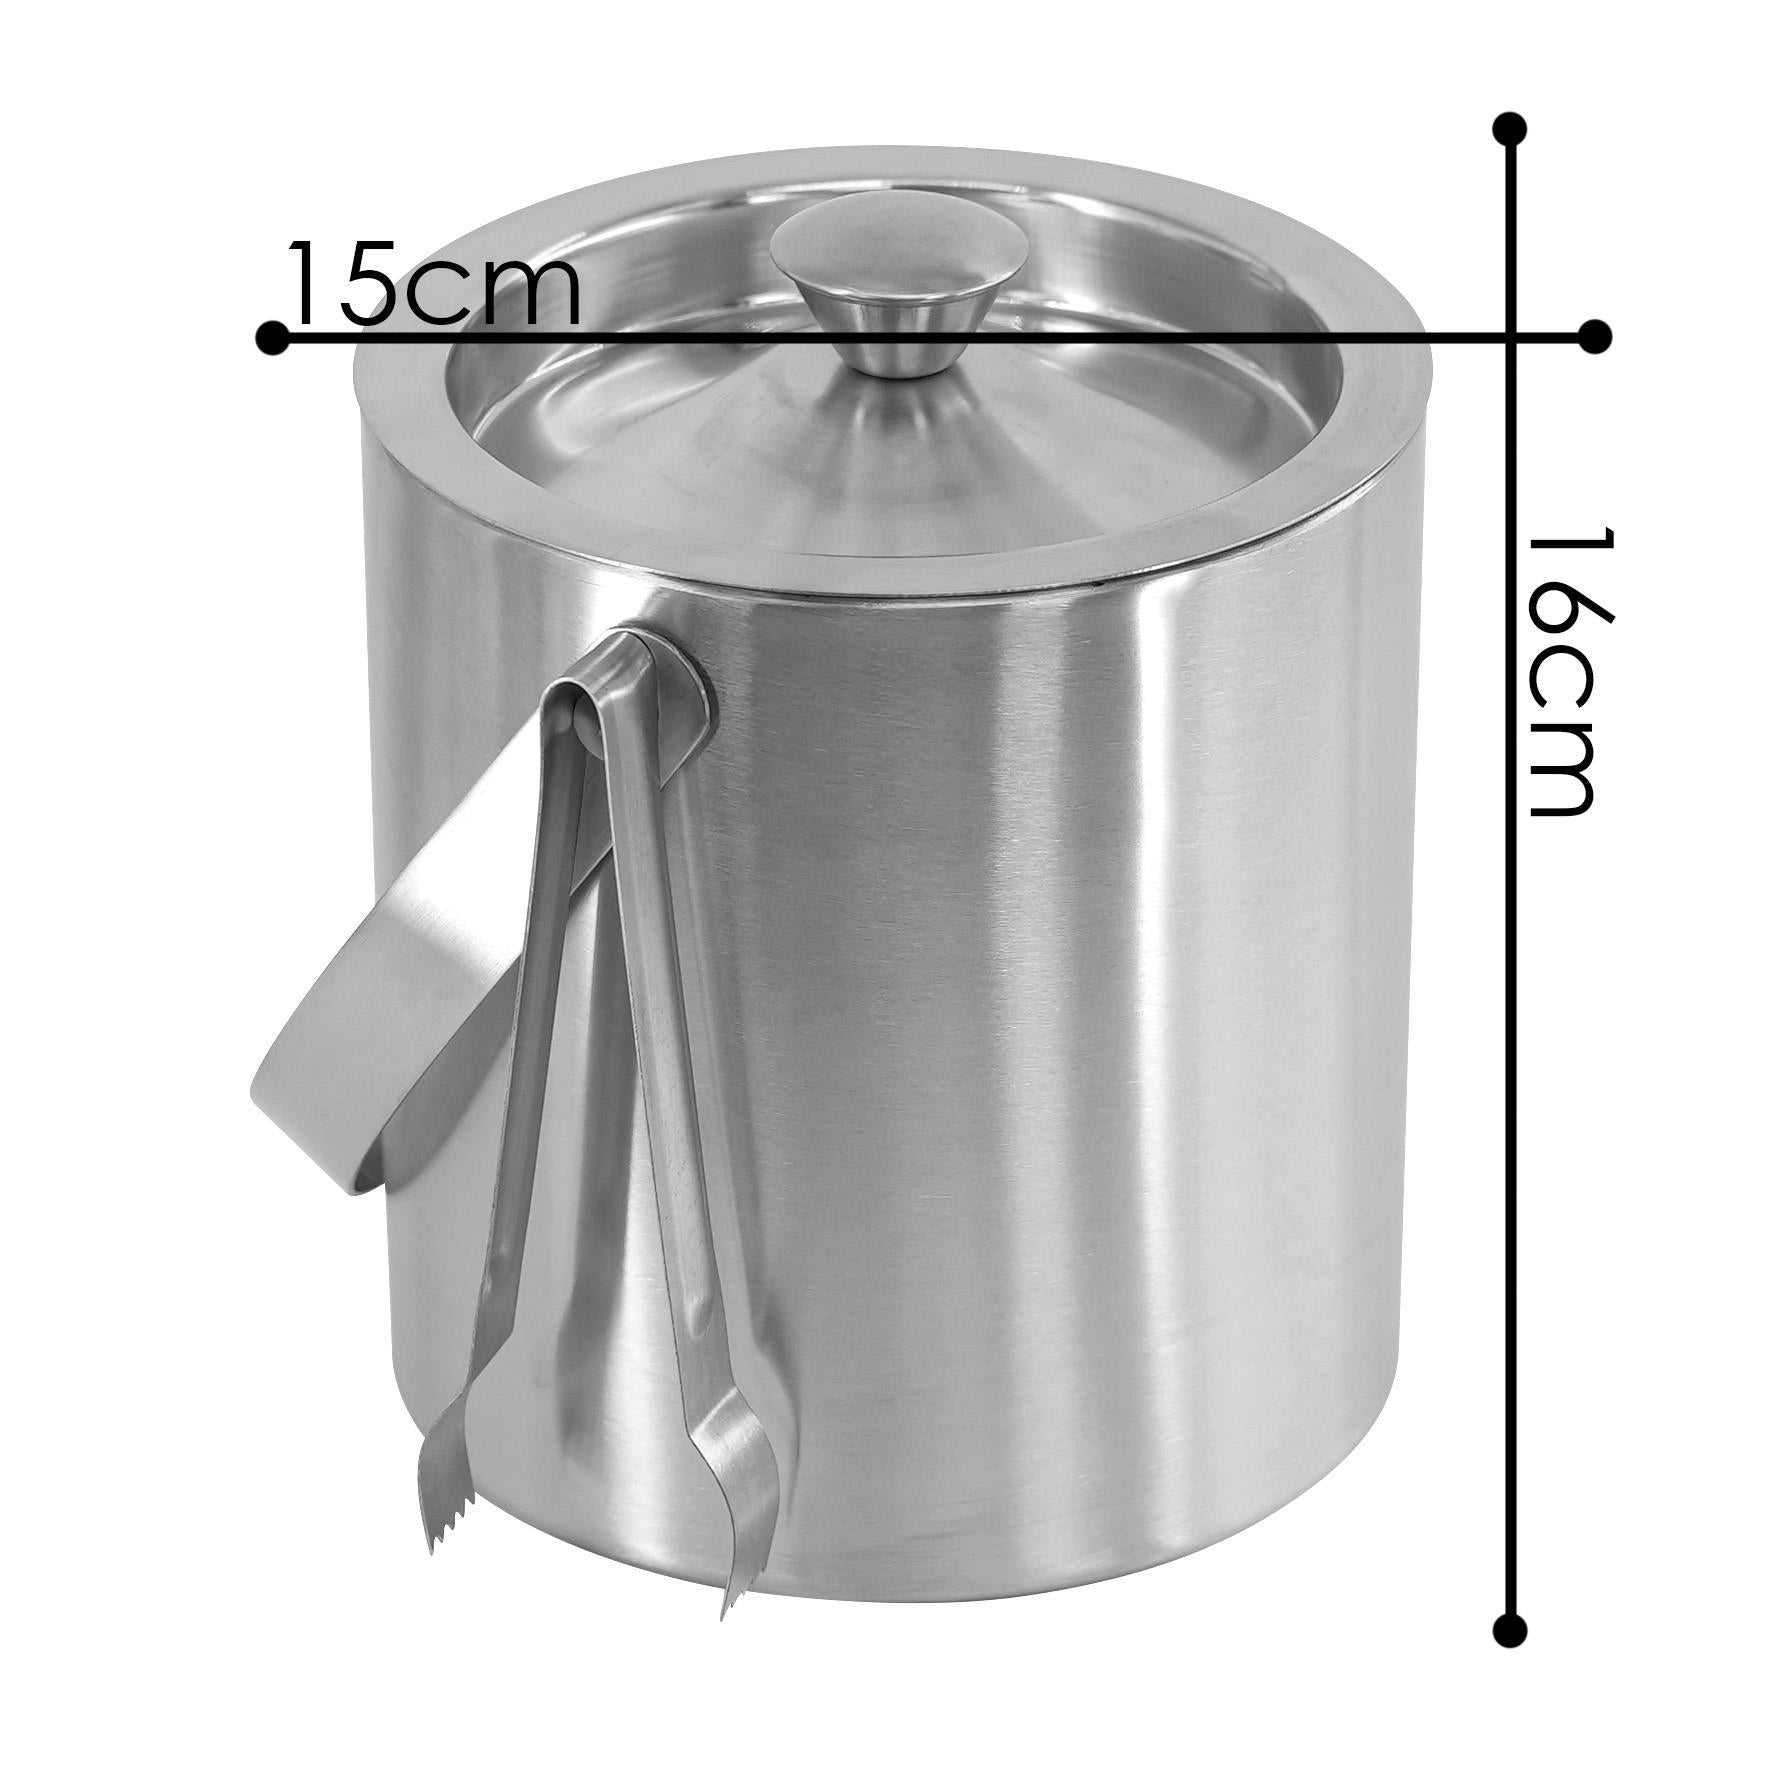 Stainless Steel Ice Bucket With Lid And Ice Tongs by Geezy - UKBuyZone